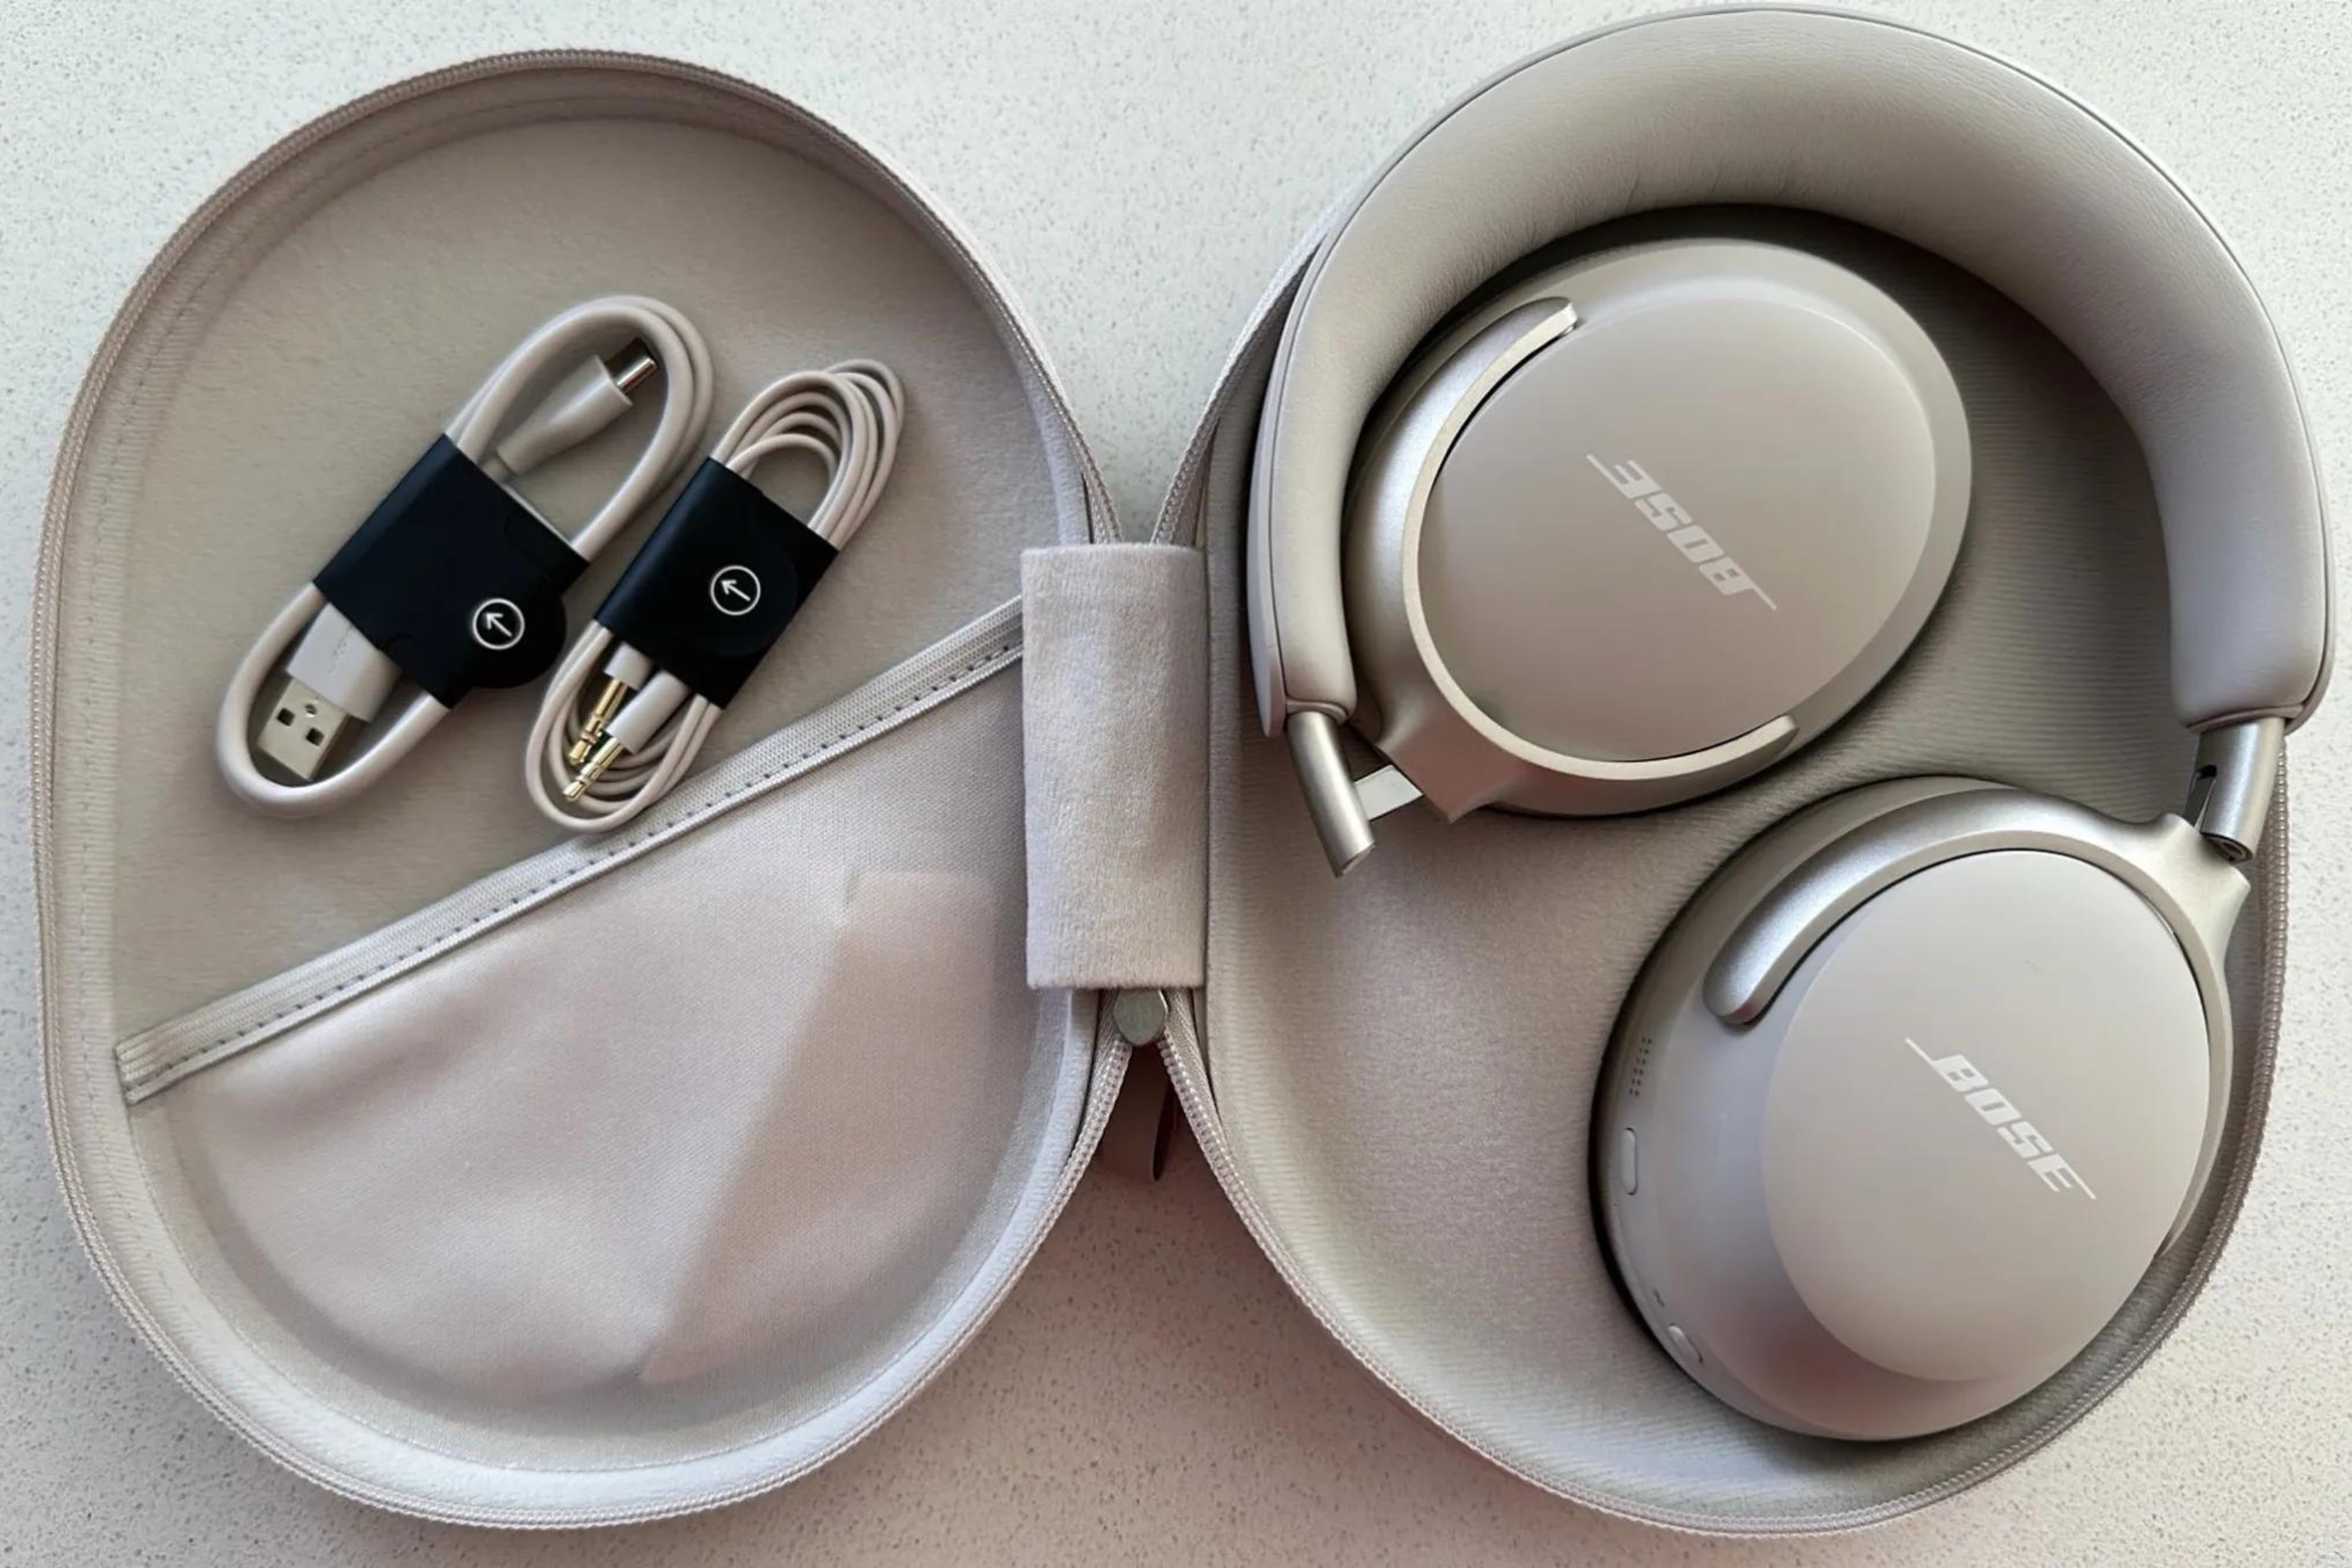 here's-our-first-real-look-at-the-bose-quietcomfort-ultra-headphones